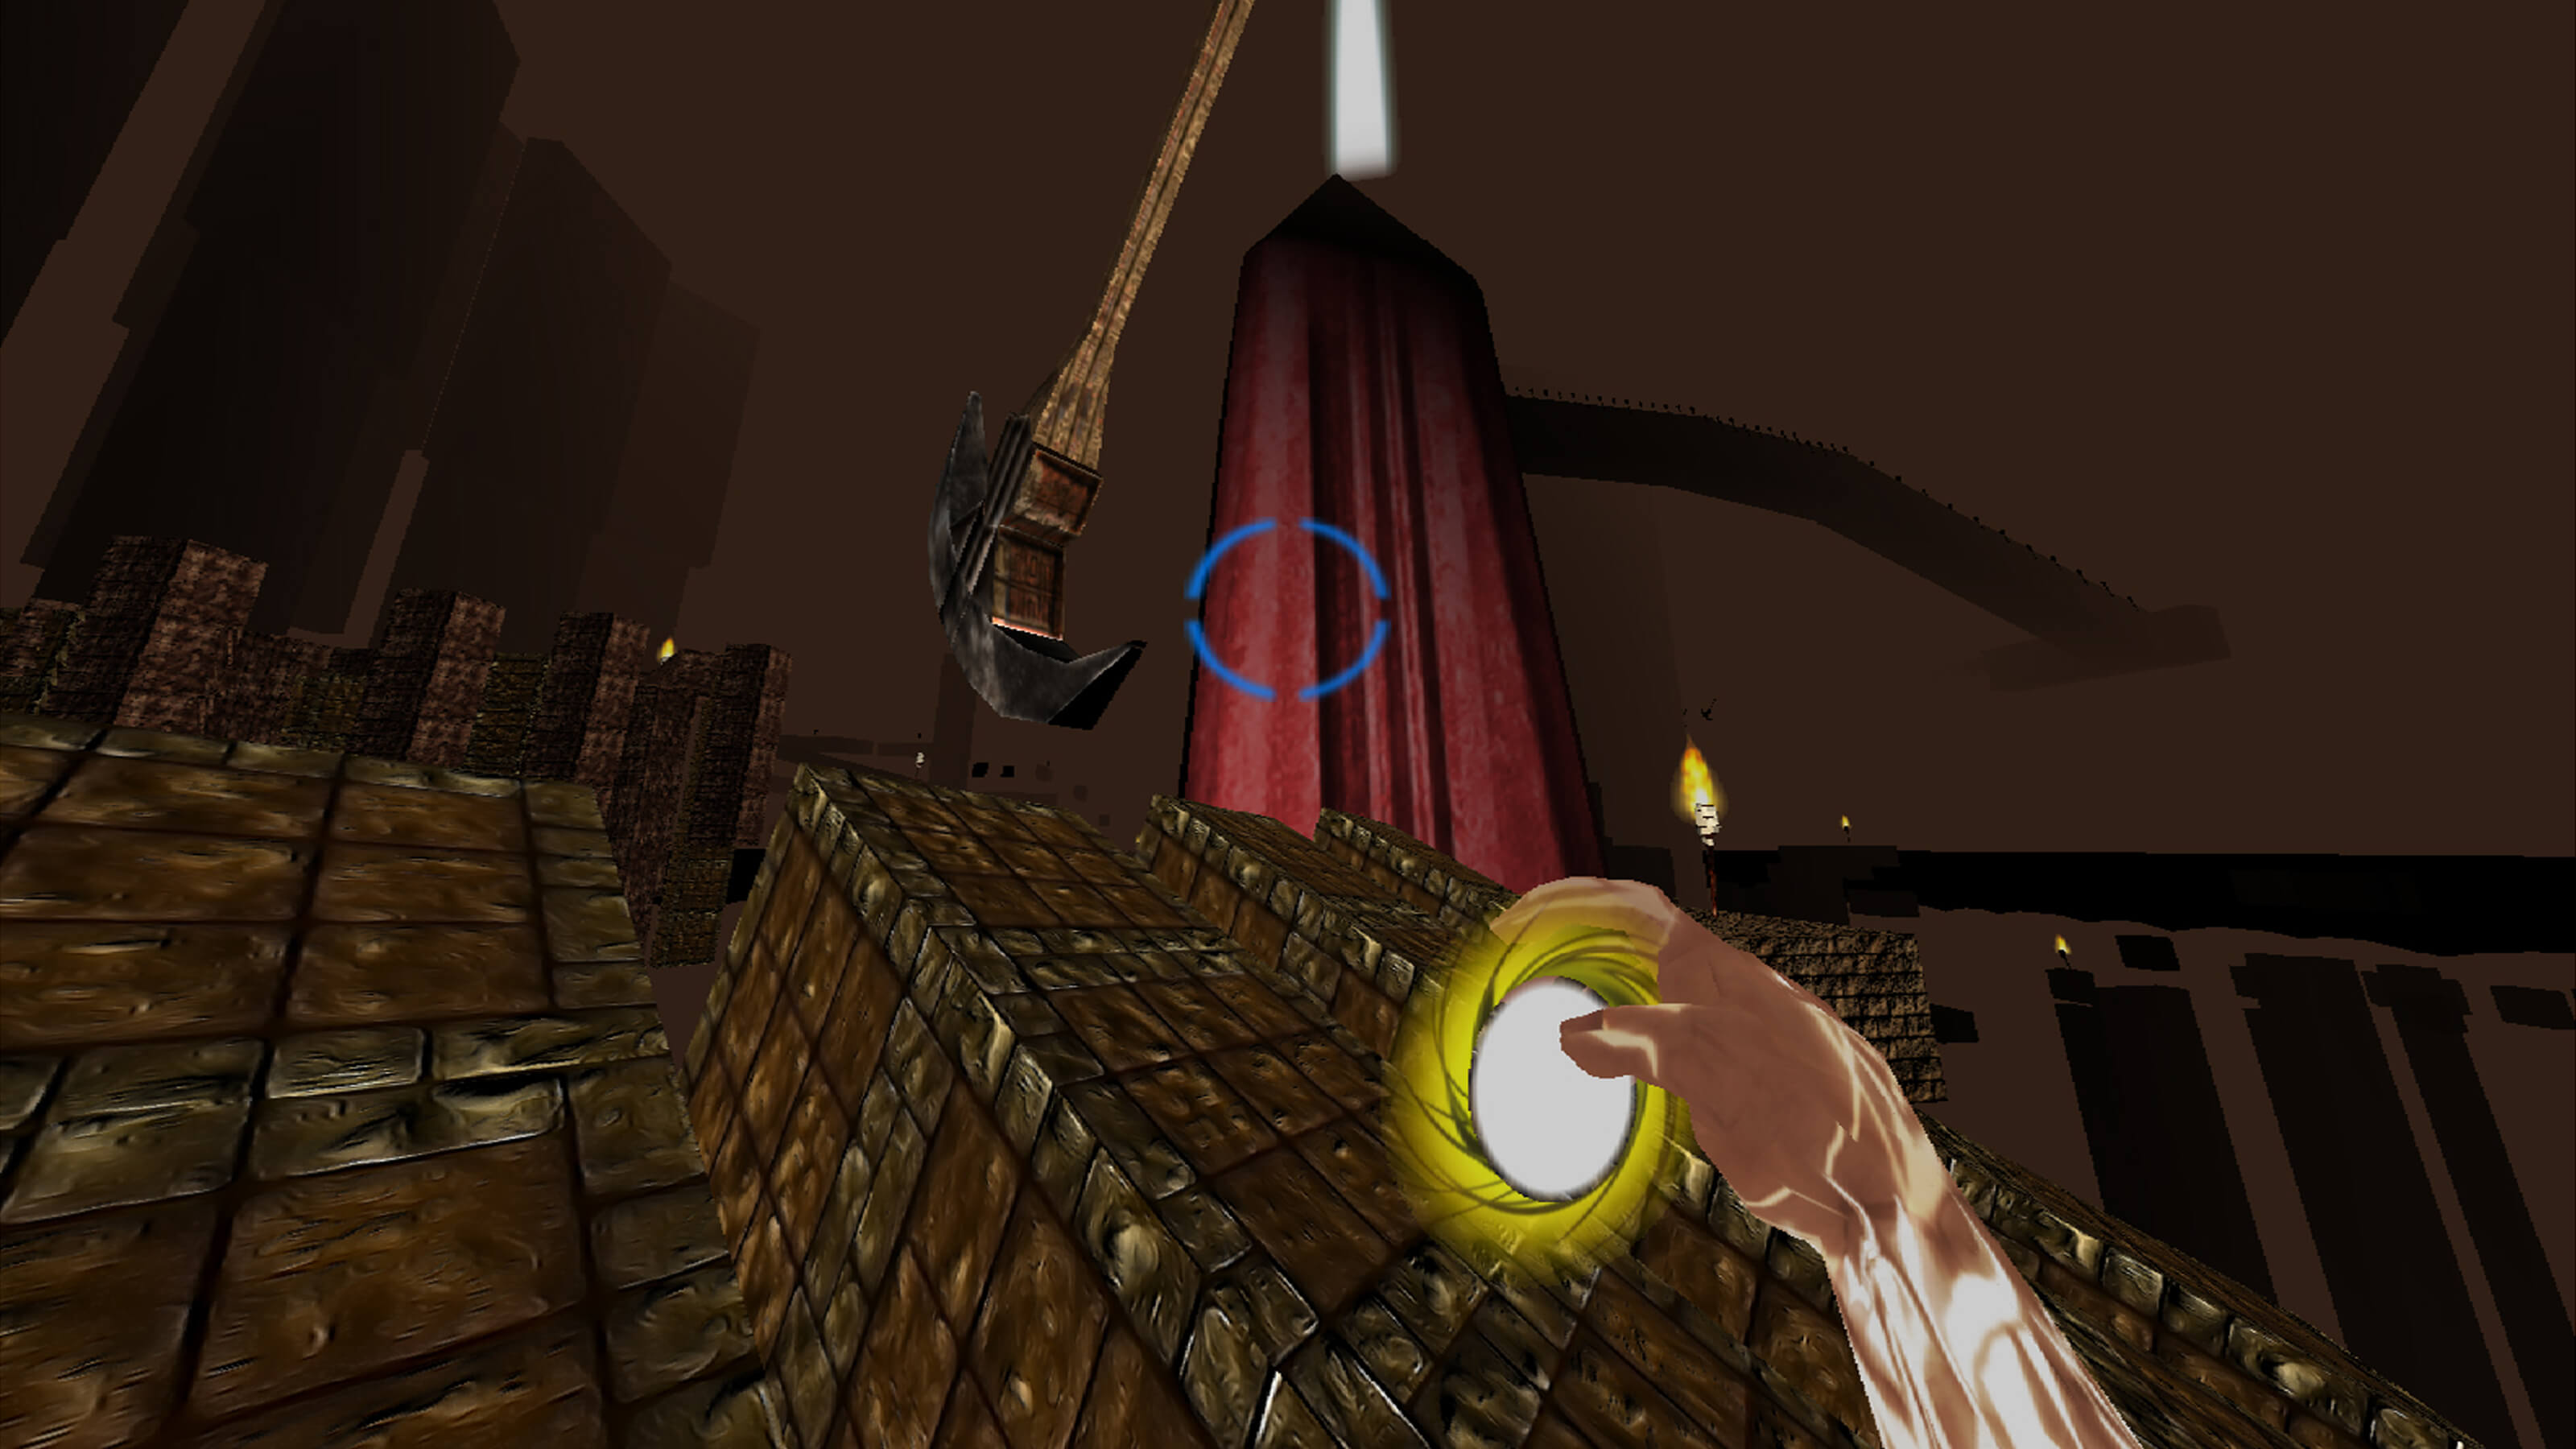 First-person view of the player on a sloped, stone terrain. The player's hand is seen holding a yellow ball of light.